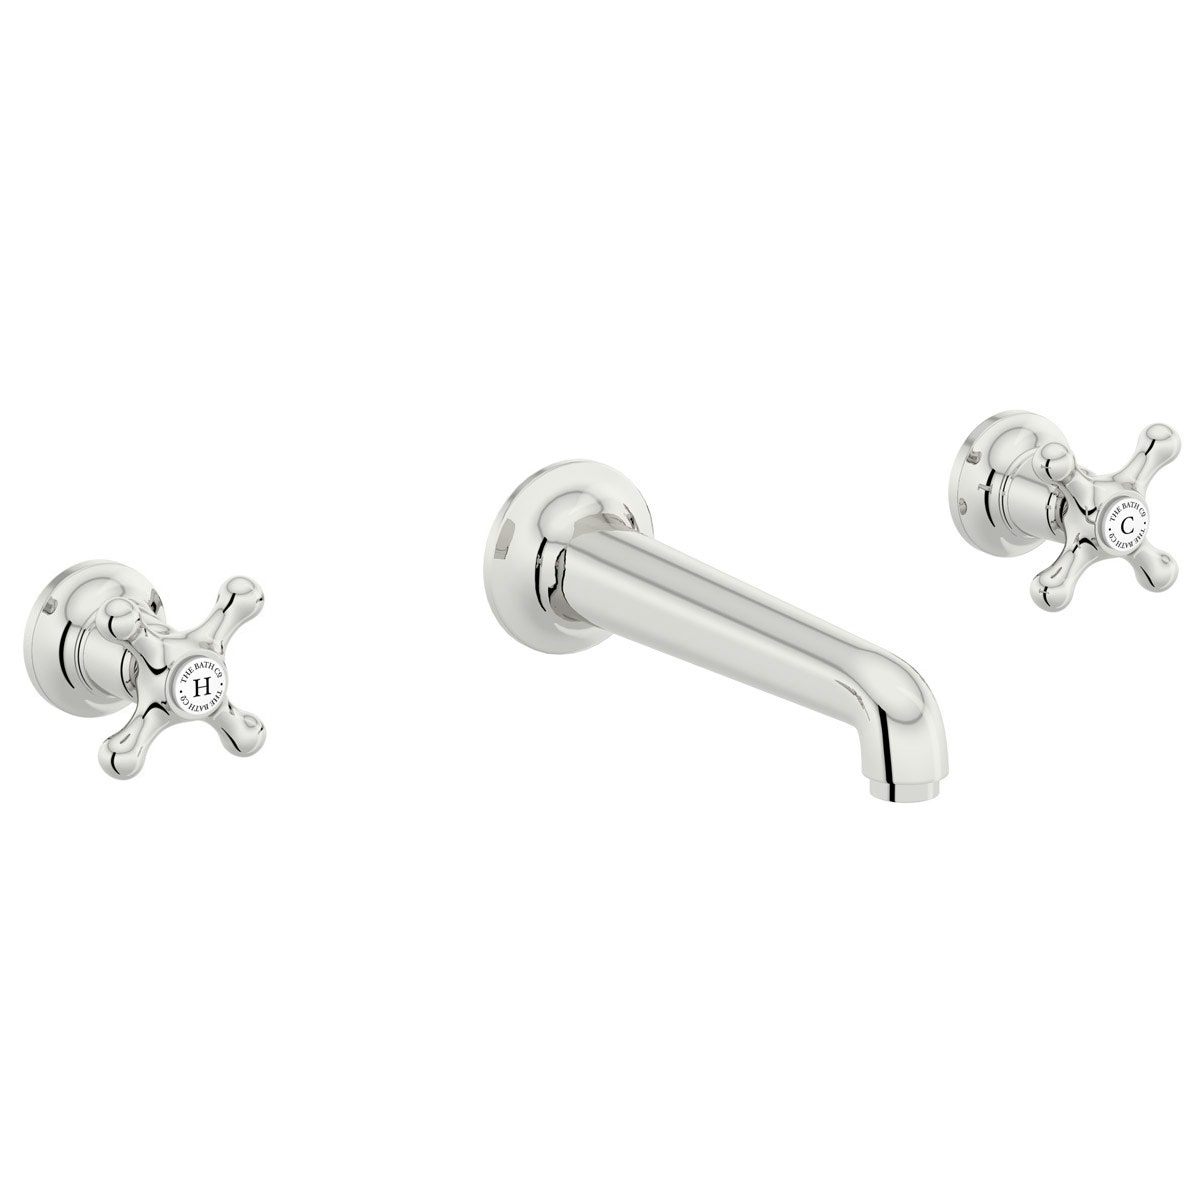 The Bath Co. Camberley wall mounted basin mixer tap with slotted waste